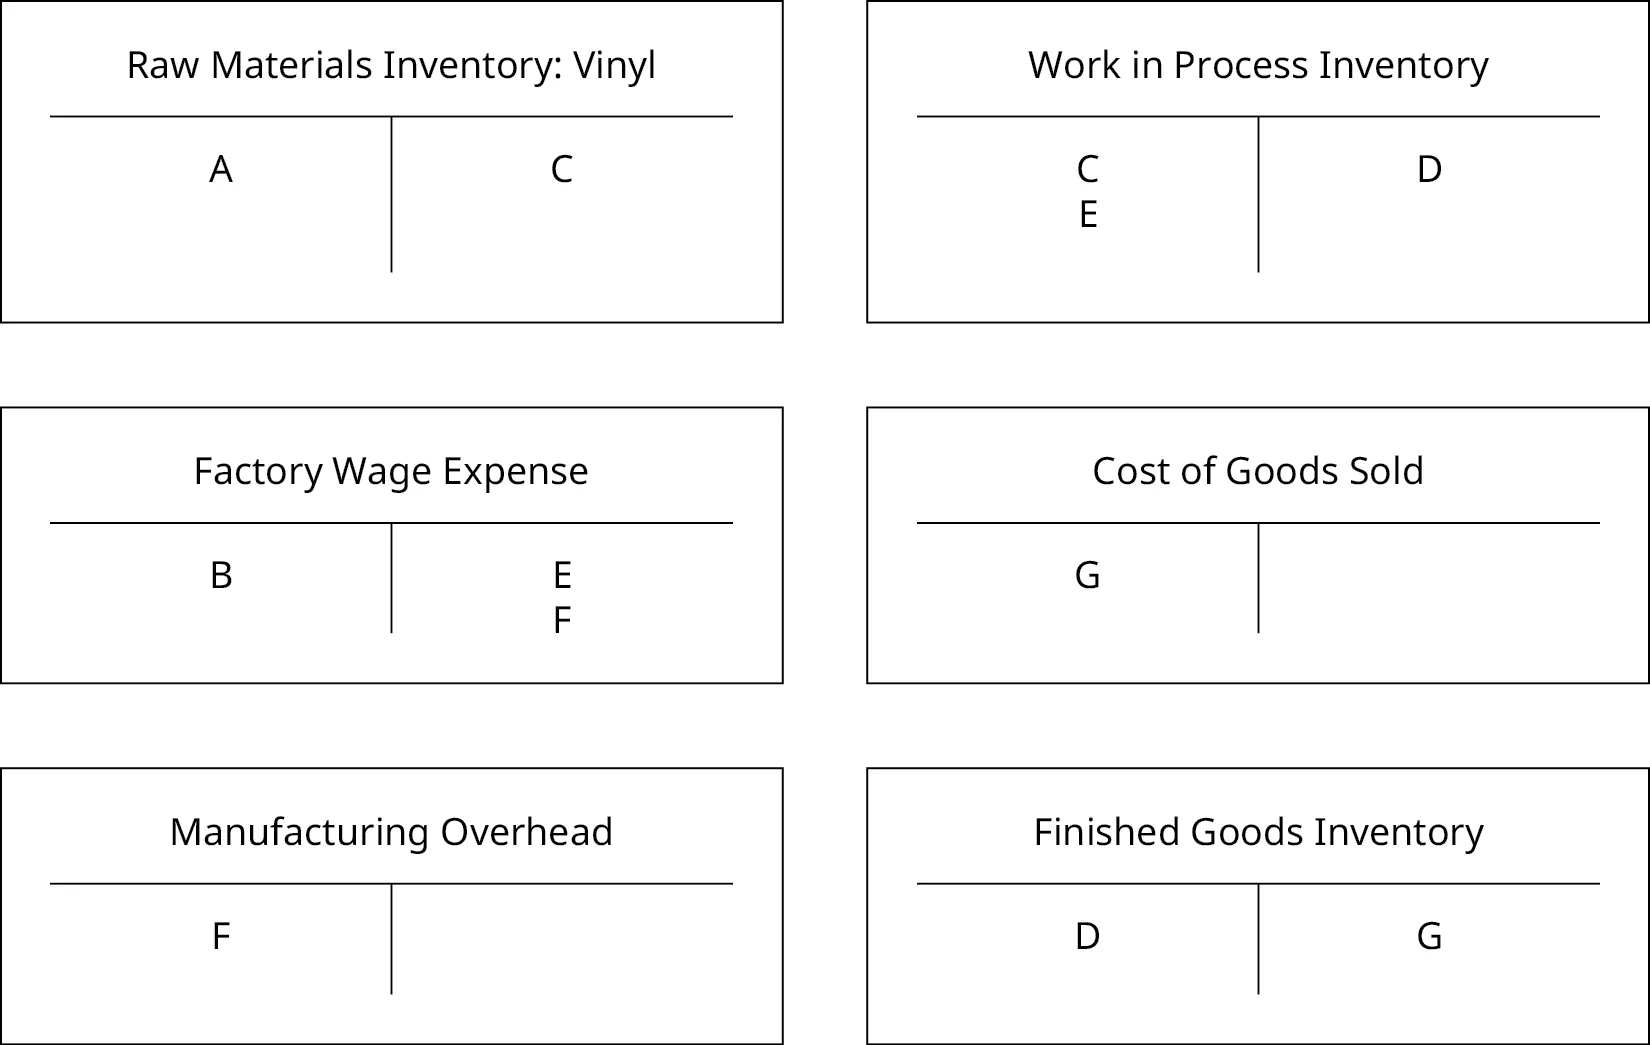 The six T-Accounts: one each for “Raw Materials Inventory: Vinyl”, “Factory Wage Expense”, “Manufacturing Overhead”, “Work in Process Inventory”, “Cost of Goods Sold”, and “Finished Goods Inventory” are now filled out. “Raw Materials Inventory: Vinyl” has an A on the debit side and a C on the credit side, “Factory Wage Expense” has a B on the debit side, and an E and F on the credit side, “Manufacturing Overhead” has an F on the debit side, “Work in Process Inventory” has a C and E on the debit side and a D on the credit side, “Cost of Goods Sold” has a G on the debit side, and “Finished Goods Inventory” has a D on the debit and G on the credit side.